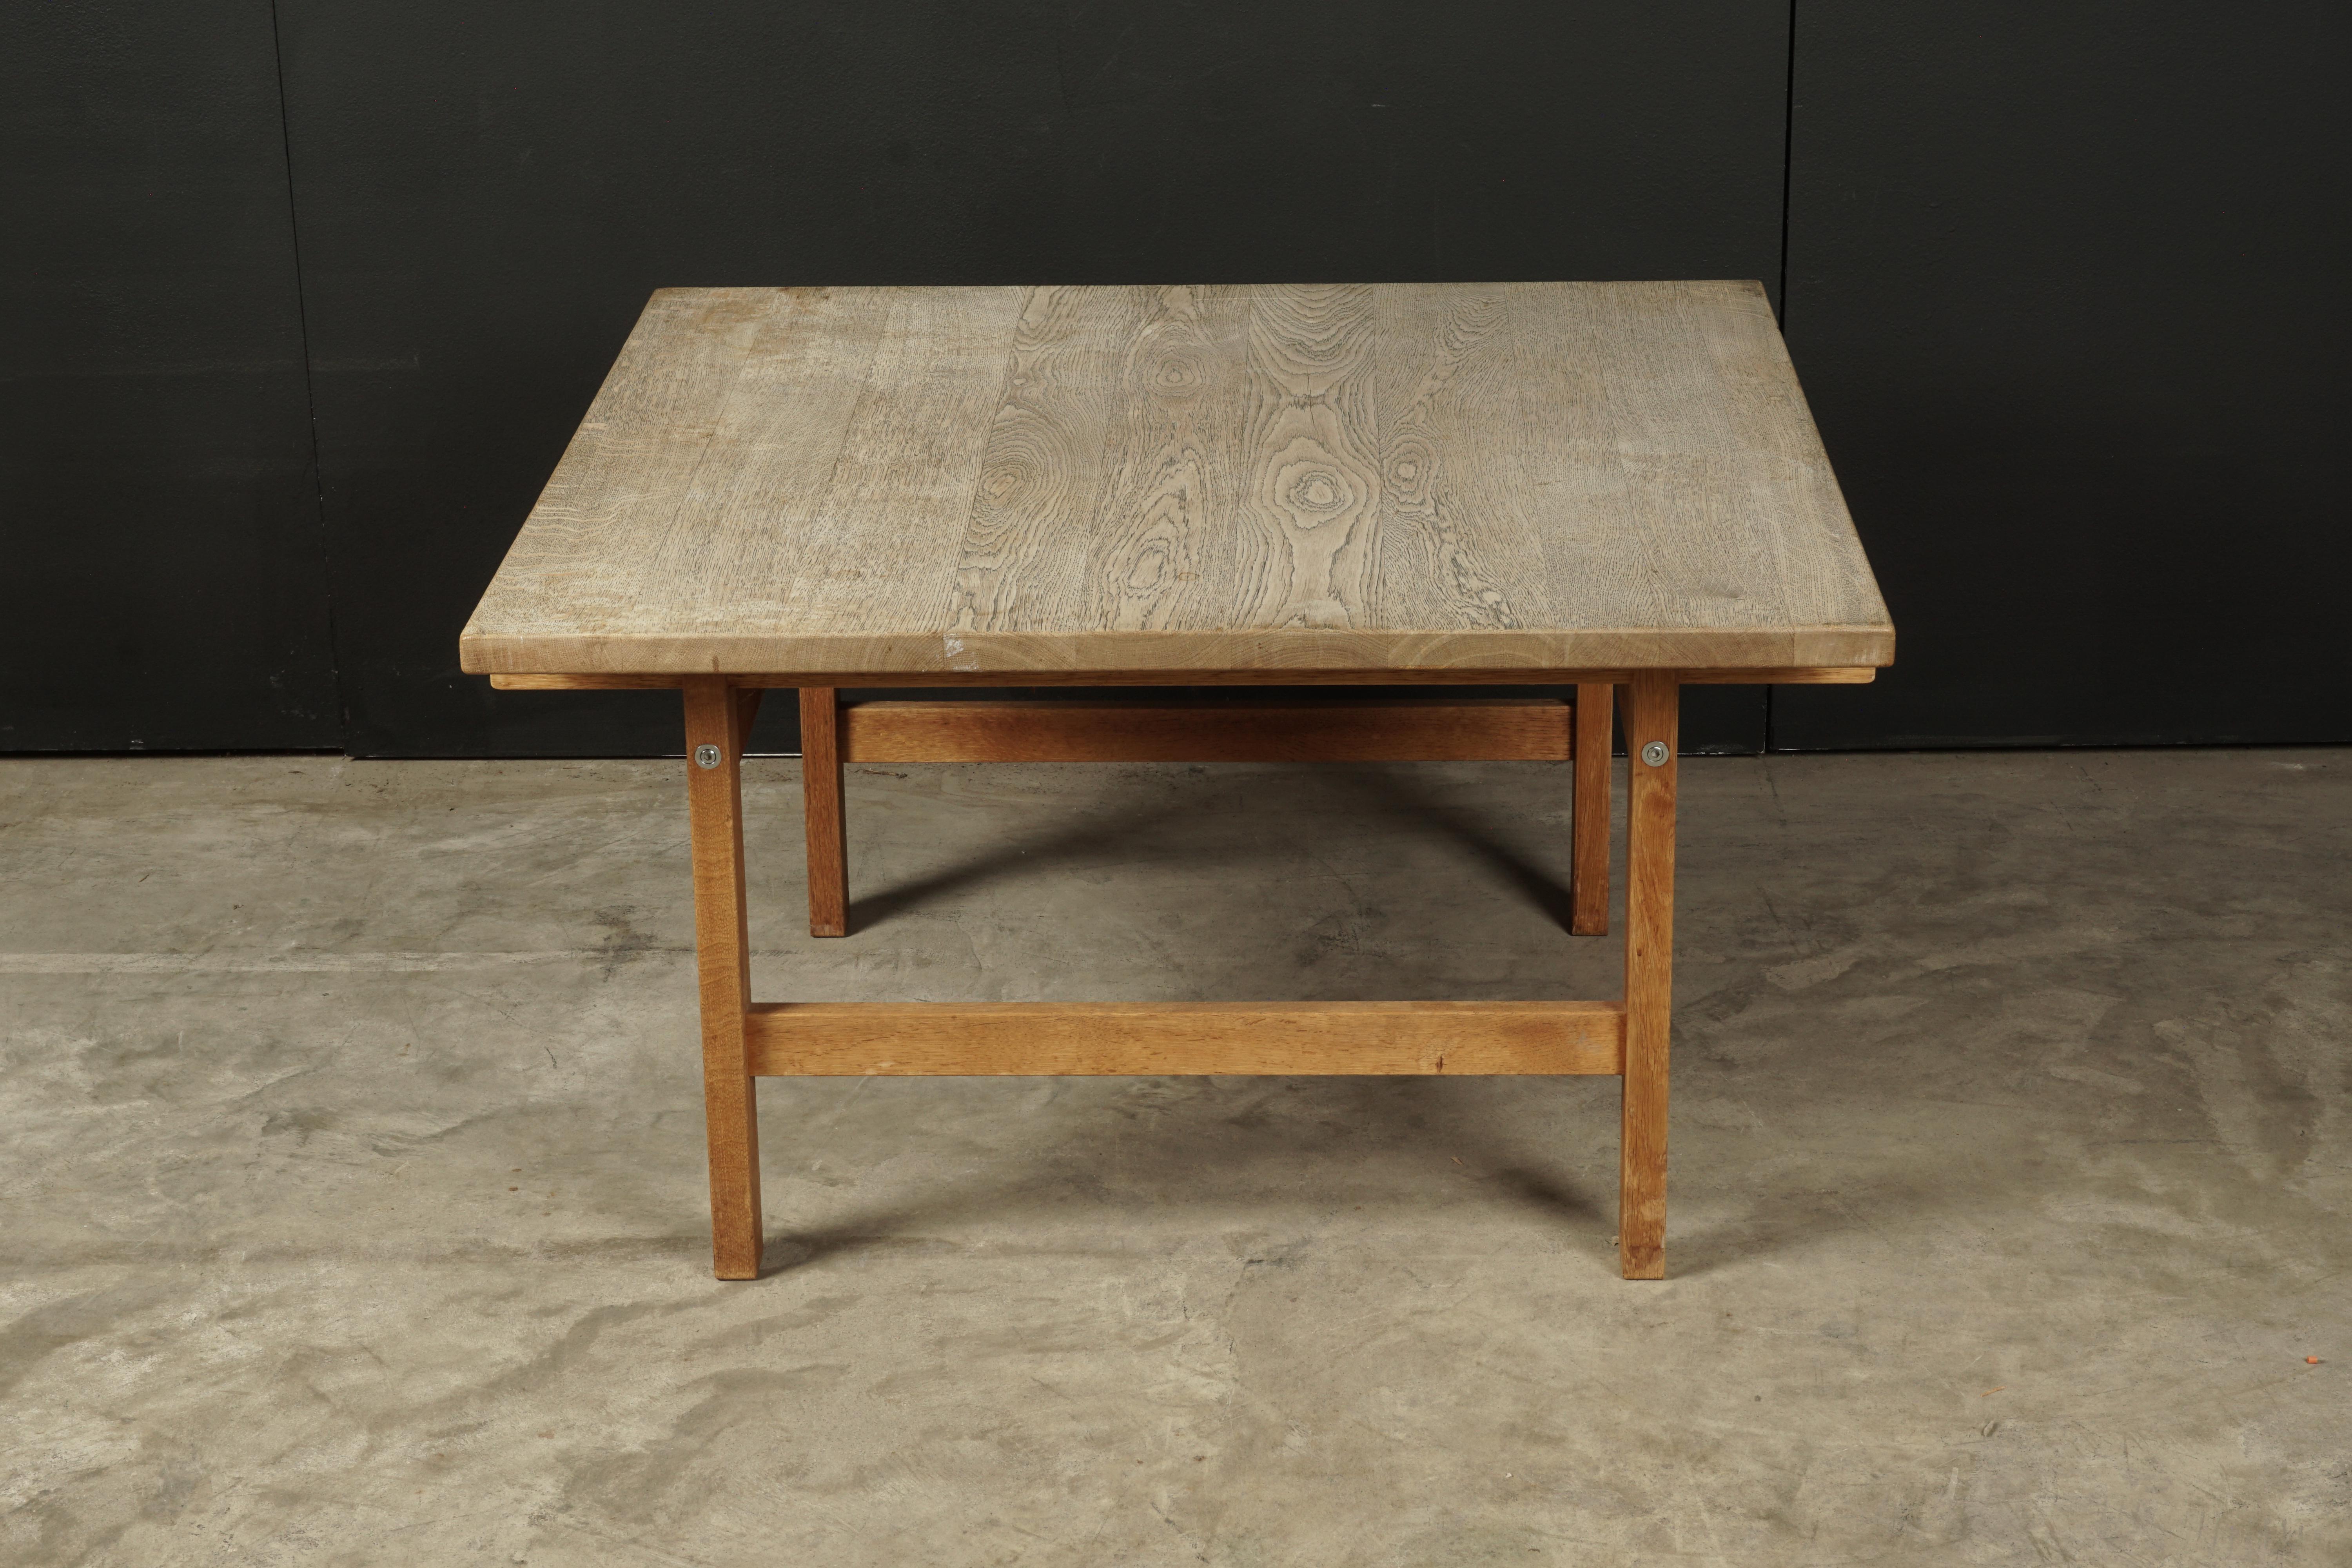 Vintage oak coffee table designed by Hans Wegner, Denmark, circa 1970. Solid oak construction with nice patina and wear. Manufacturer's stamp underneath.